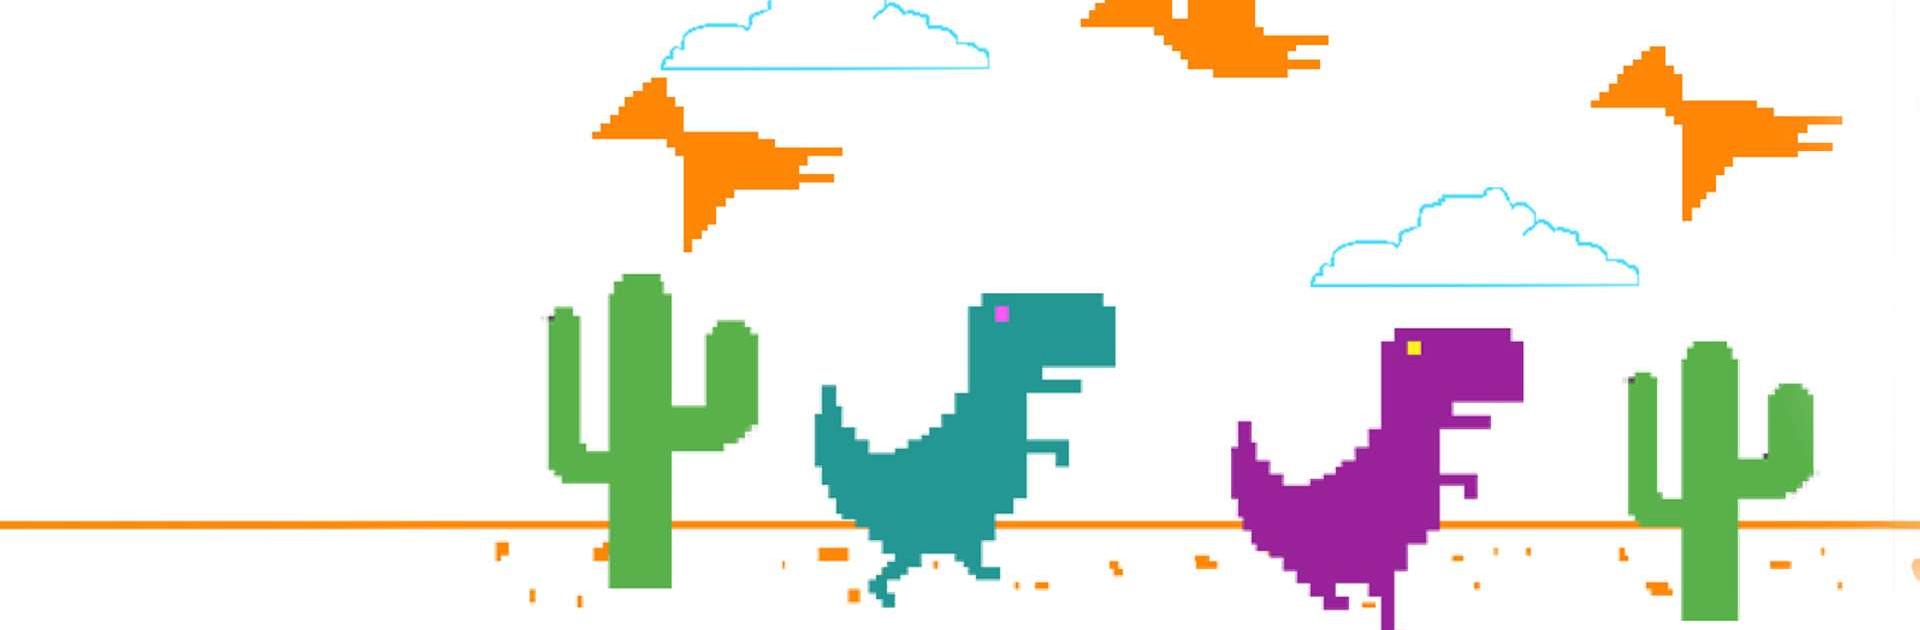 Play Christmas Dino Run Online For Free 